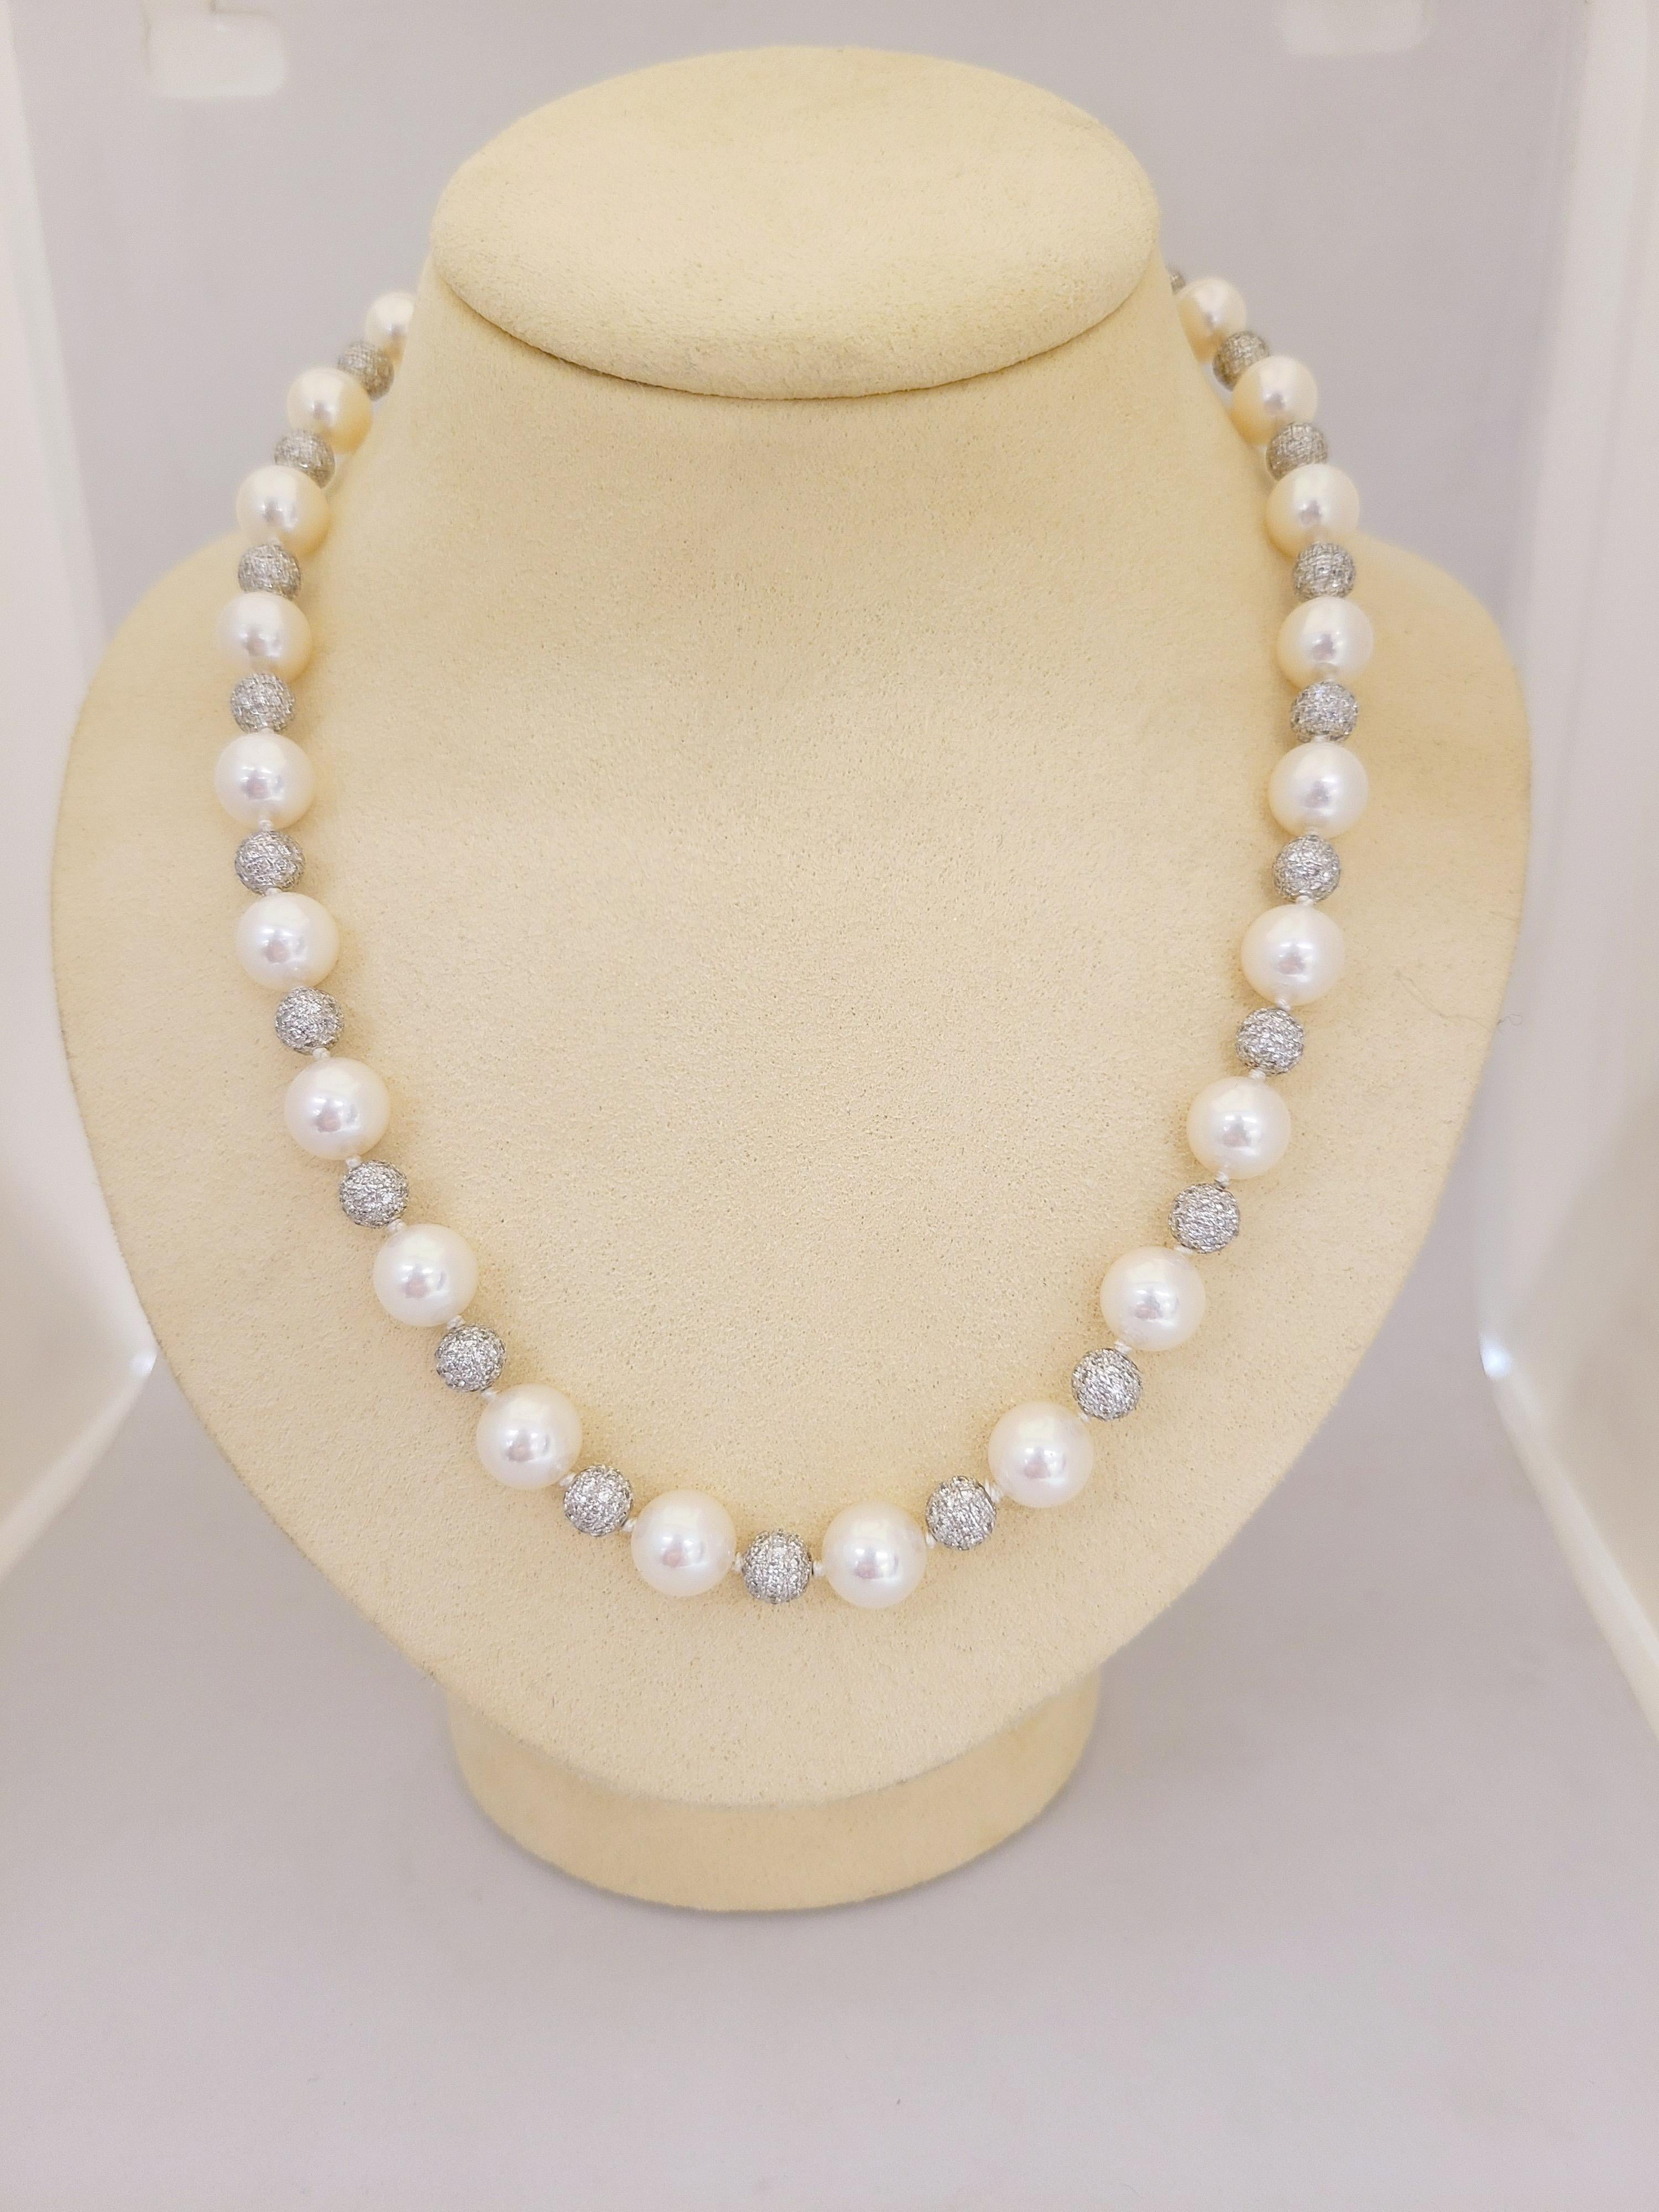 This beautiful Classic pearl and diamond strand necklace by Cellini jewelers NYC. This necklace is composed of 25 cultured 9 mm pearls alternating with 24 white gold pave diamond balls, and a pave diamond ball plunger type clasp.
18 karat white